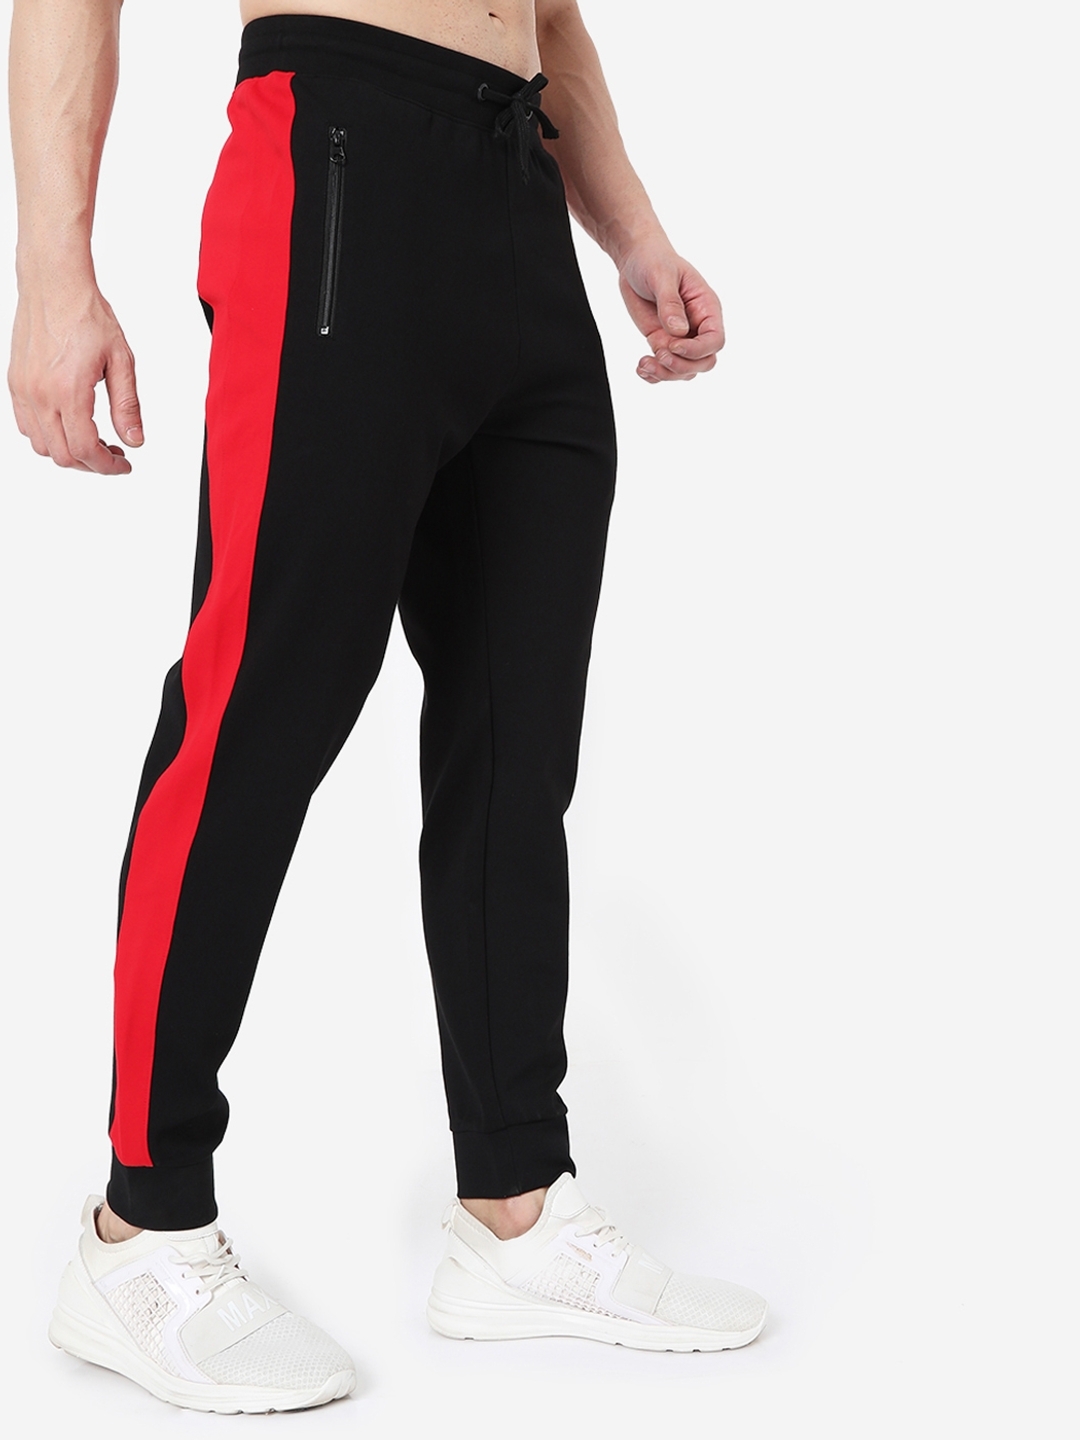 Buy Mens Super Combed Cotton Rich Slim Fit Joggers with Side Pockets   Black SP31  Jockey India